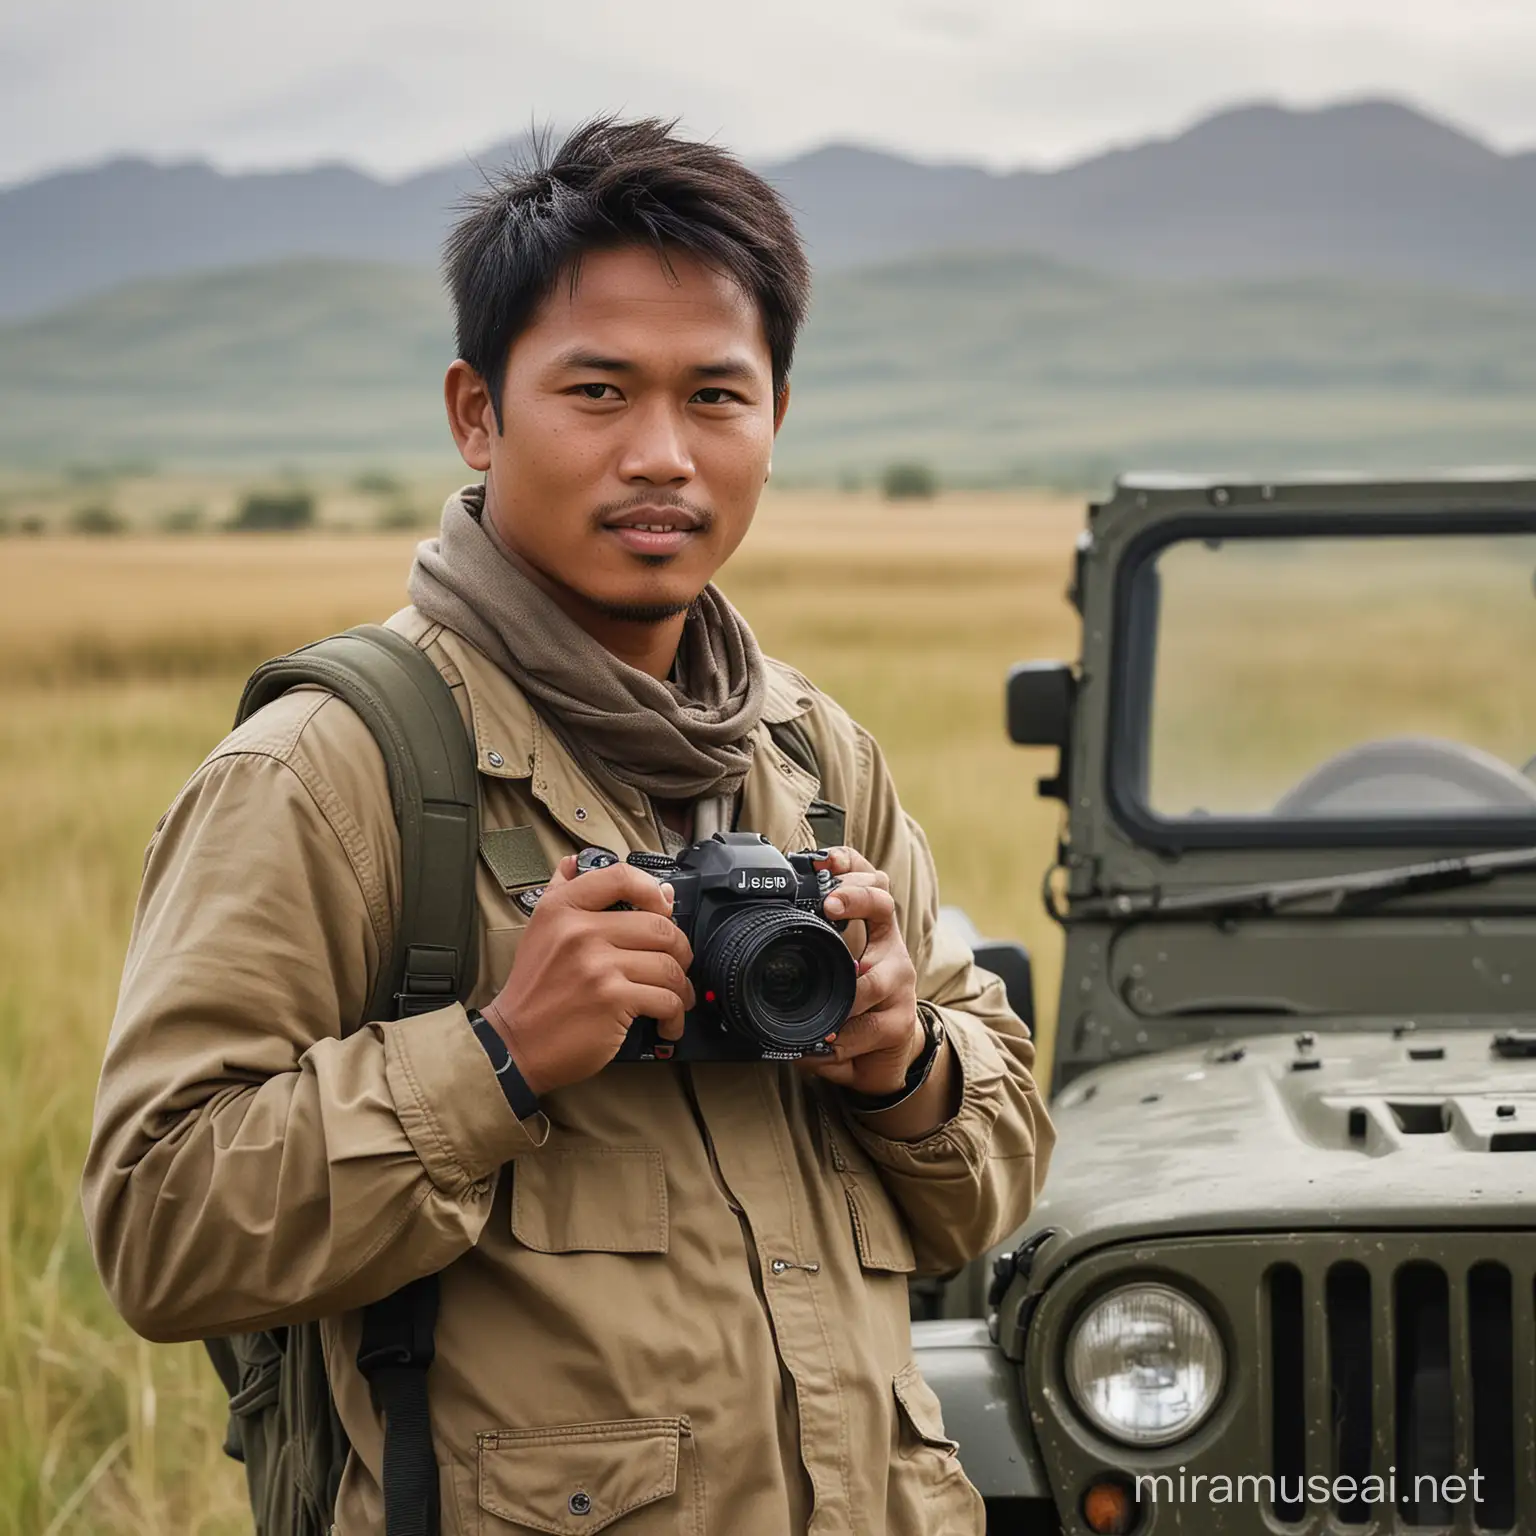 Real image, an Indonesian man with a clean,little chubby face,handsome face holding a camera with a telephoto lens, dressed in field clothes, with a jeep in the background in a grassland and sand, photographed at a distance of 5 meters by a professional photographer